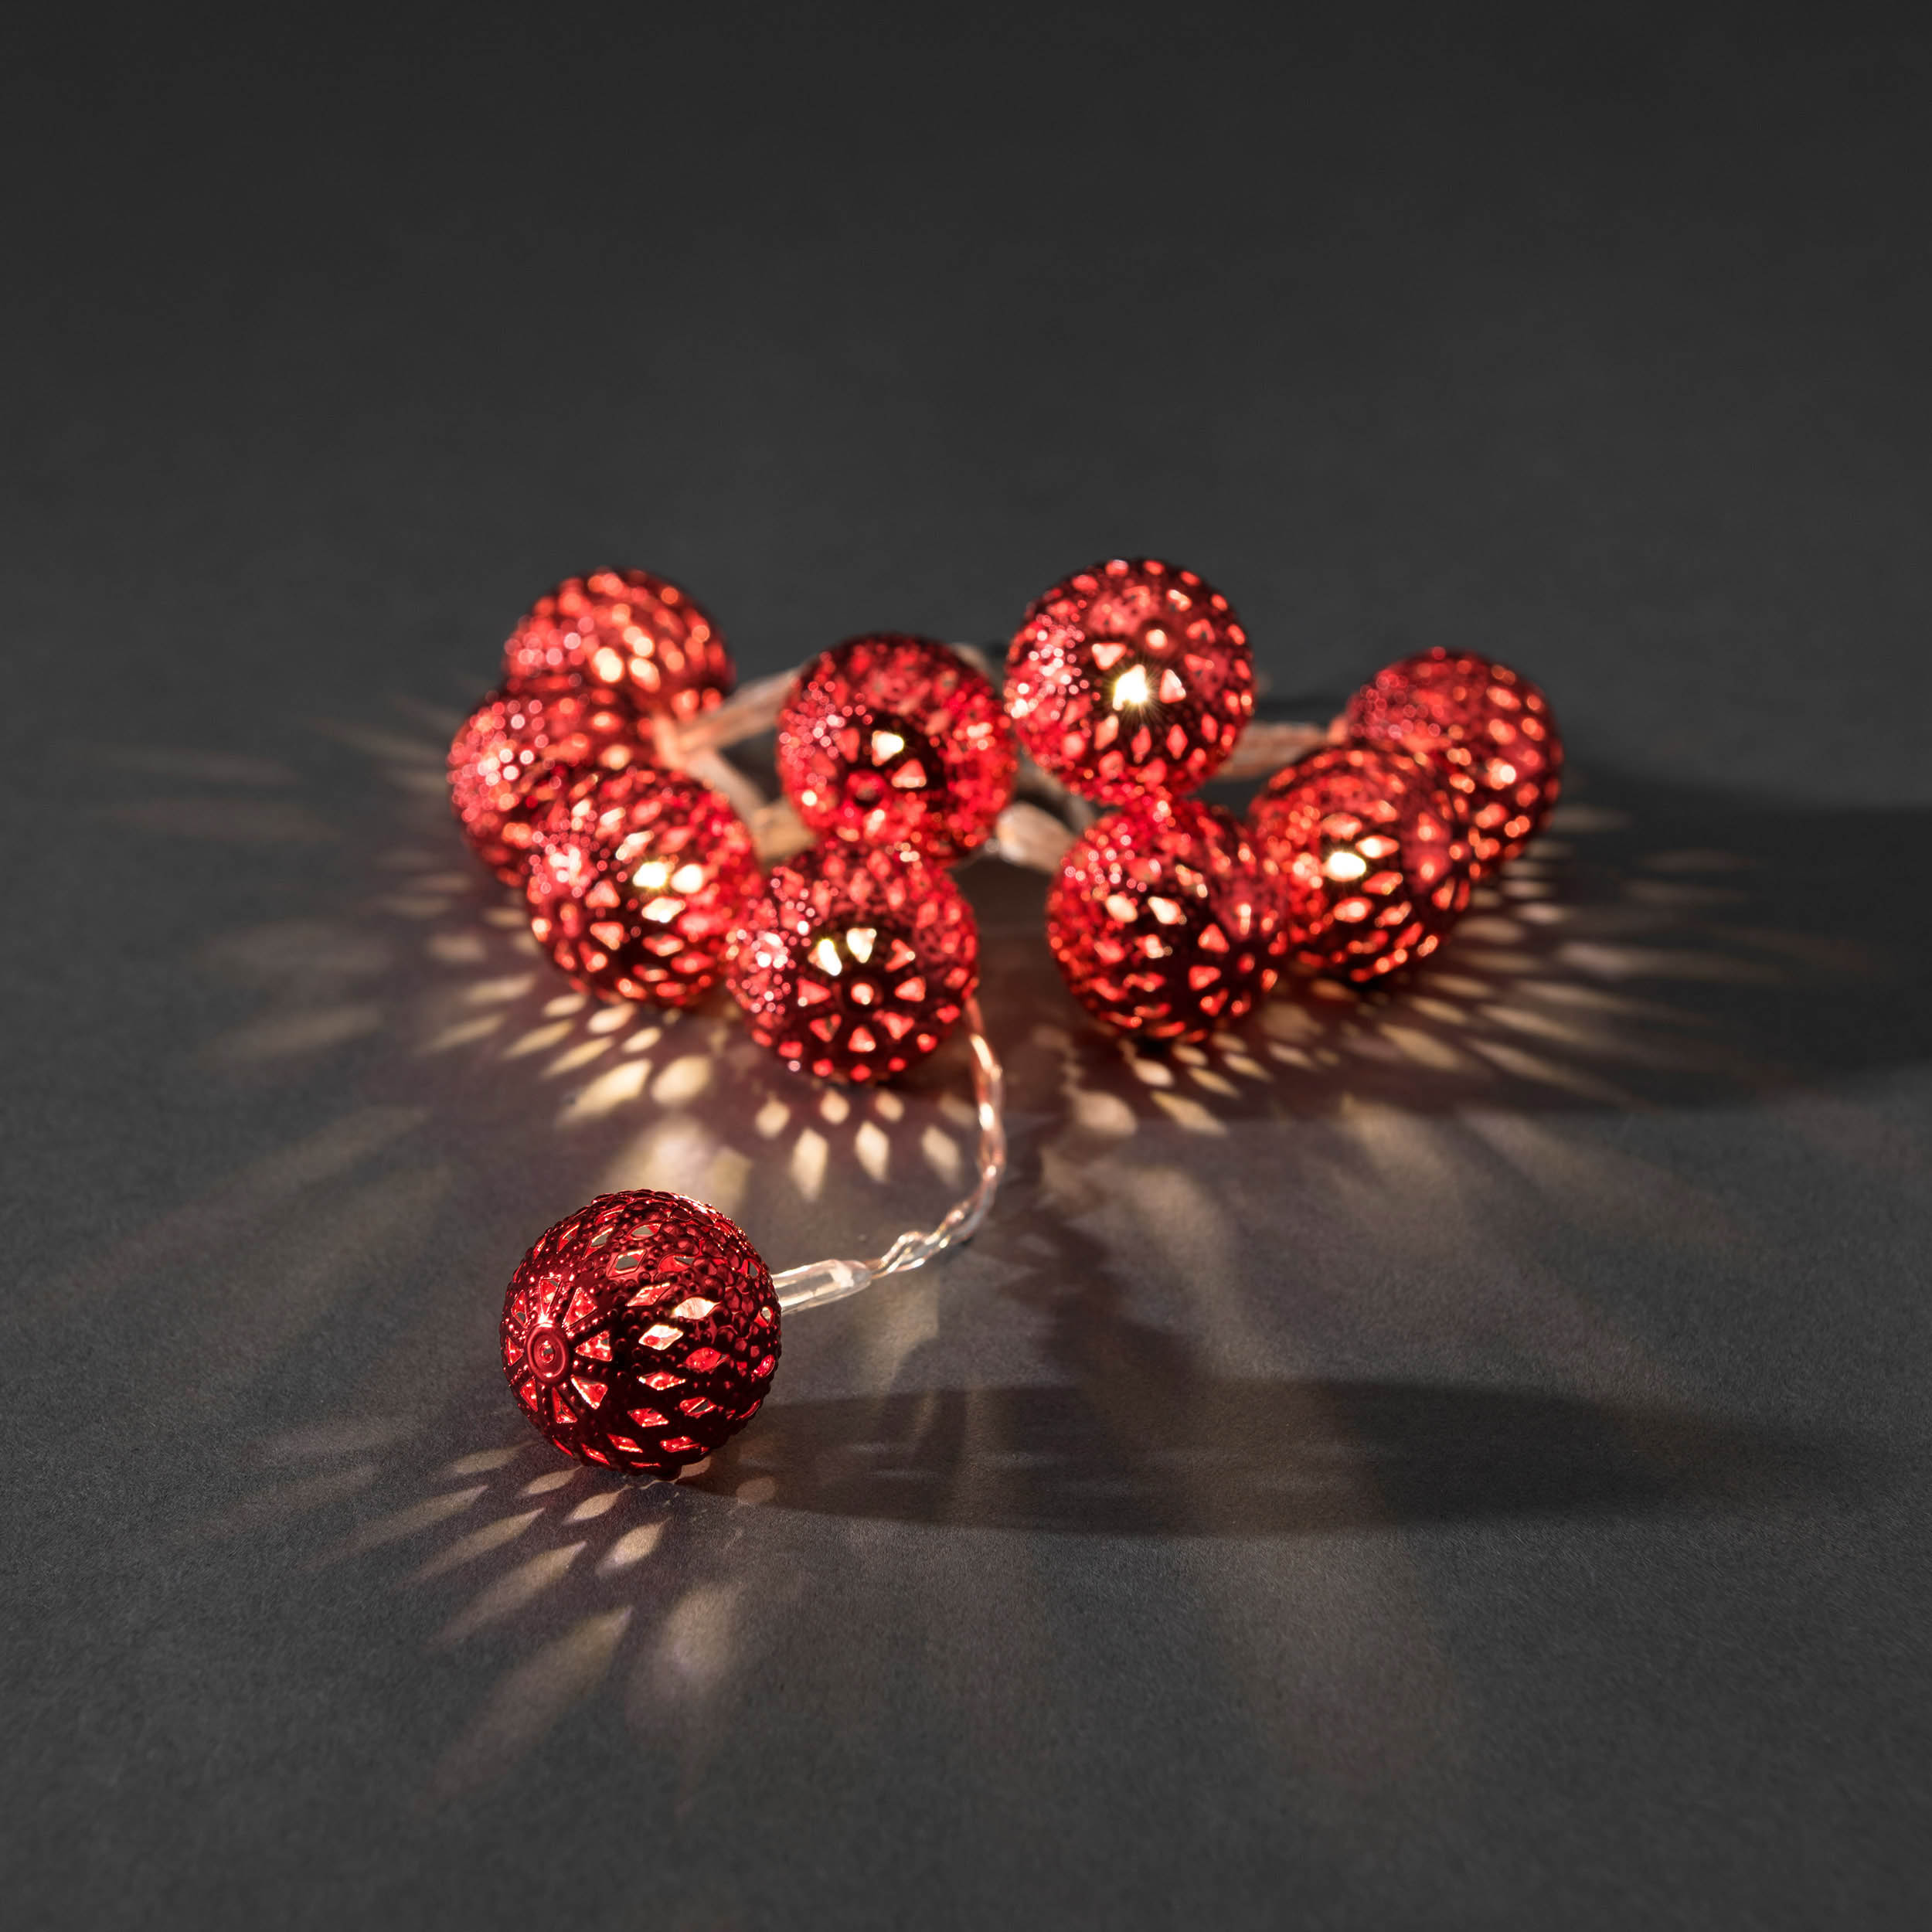 Decorative LED light set with red metal beads